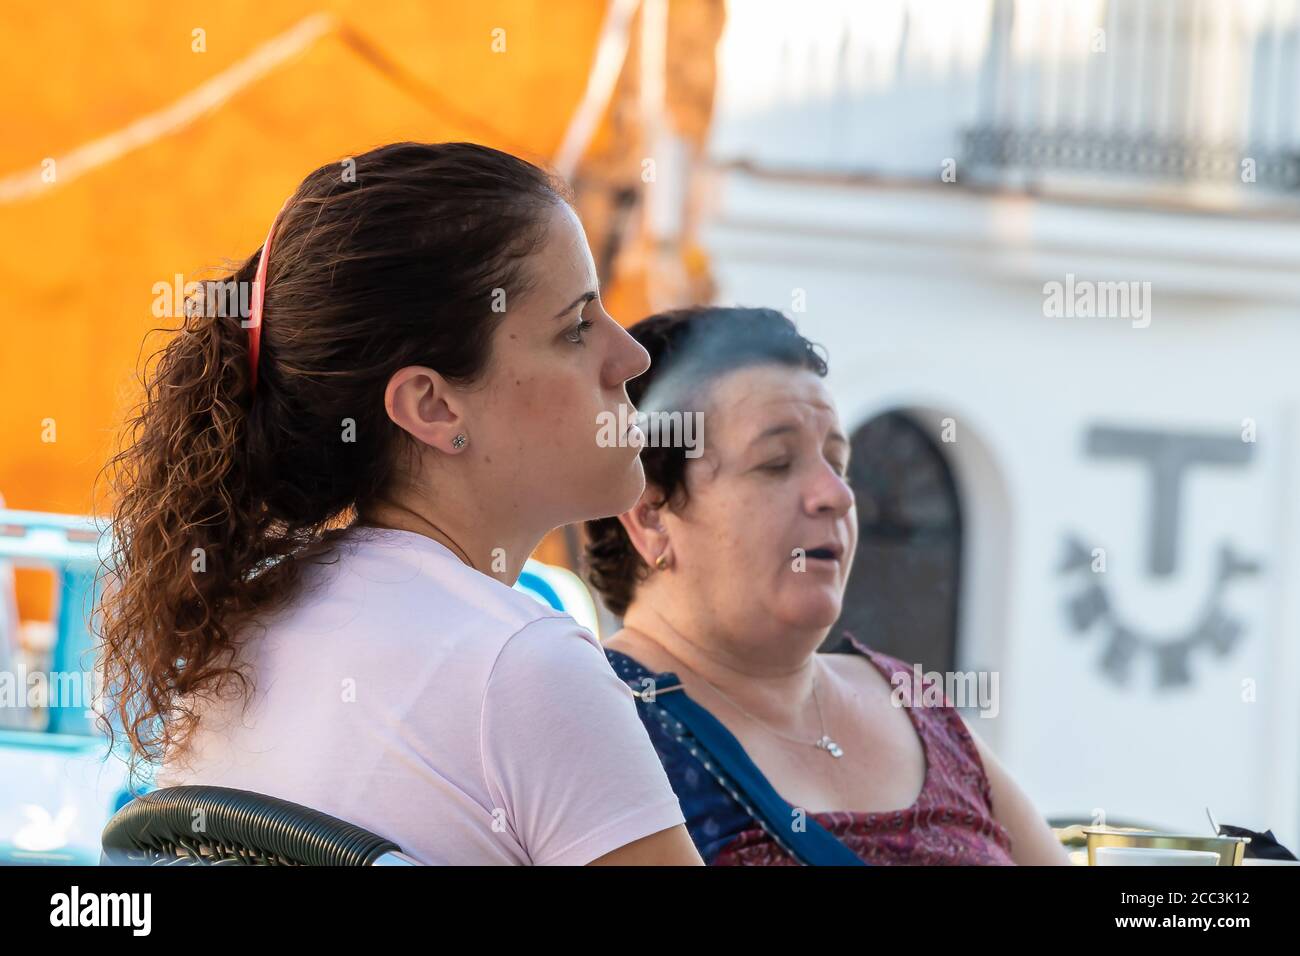 Huelva, Spain - August 17, 2020: Woman is exhaling the smoke of a cigarette in a bar terrace Stock Photo